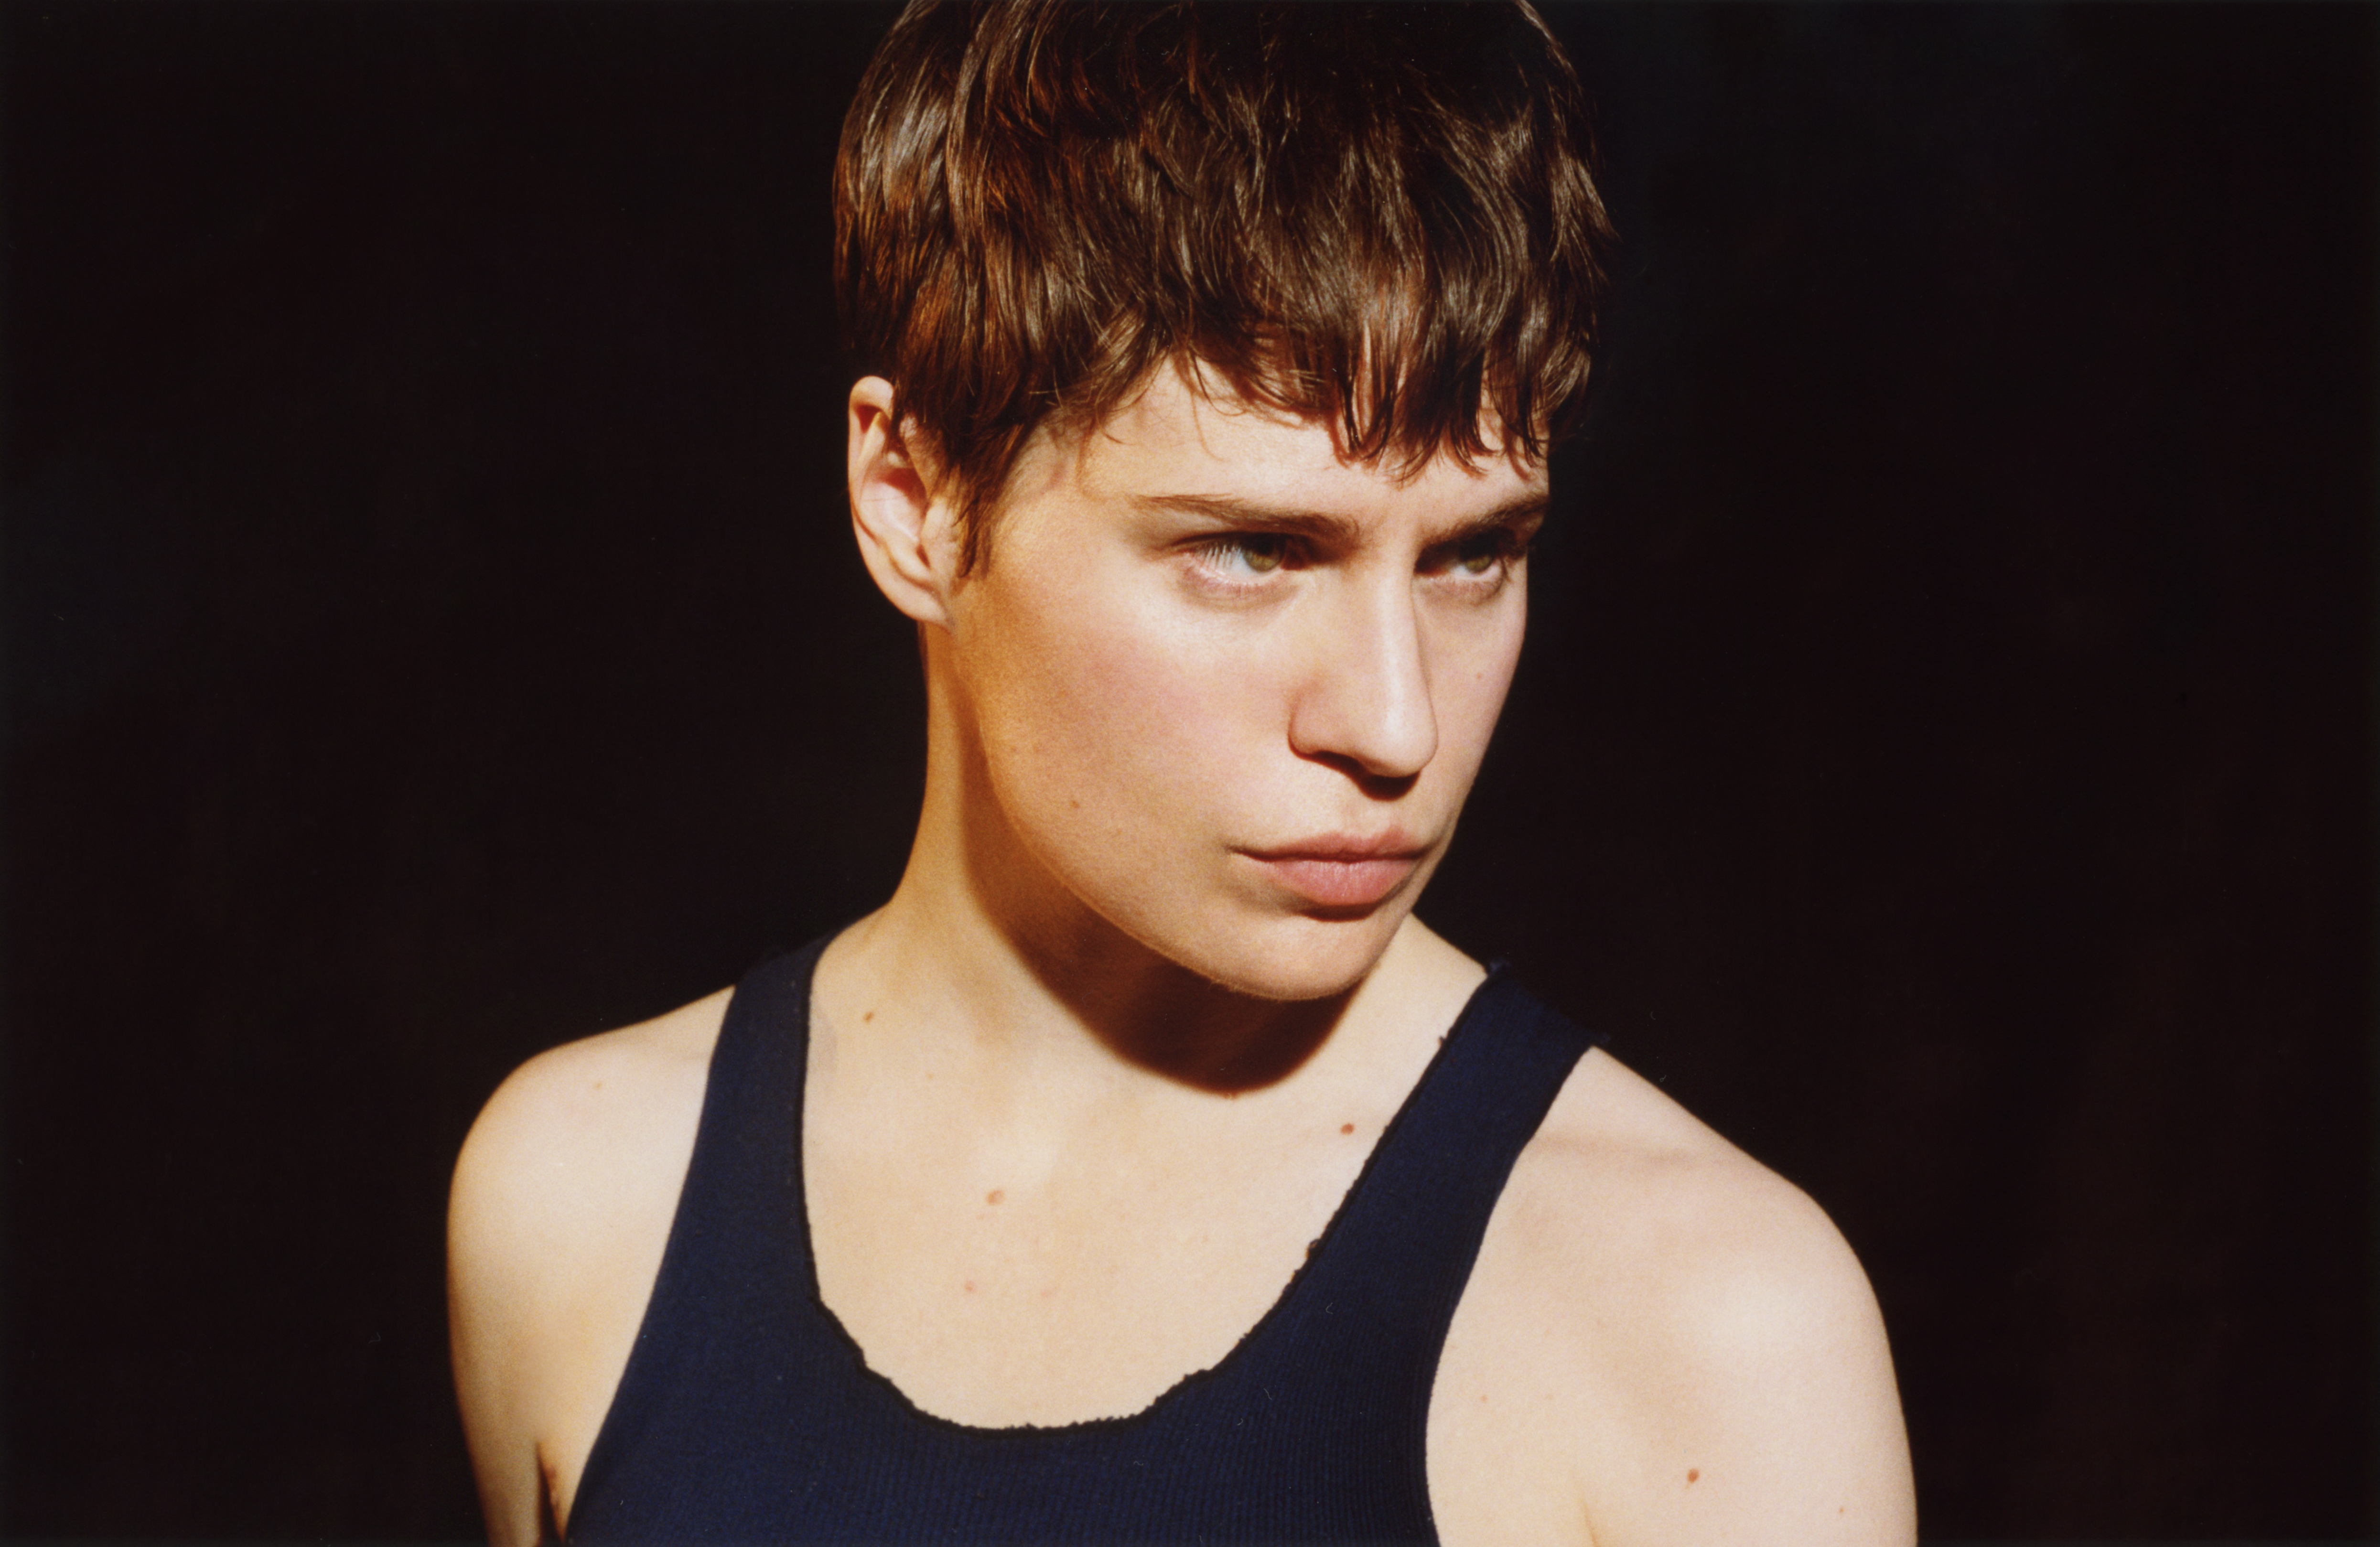 Christine and the Queens by Suffo Moncloa